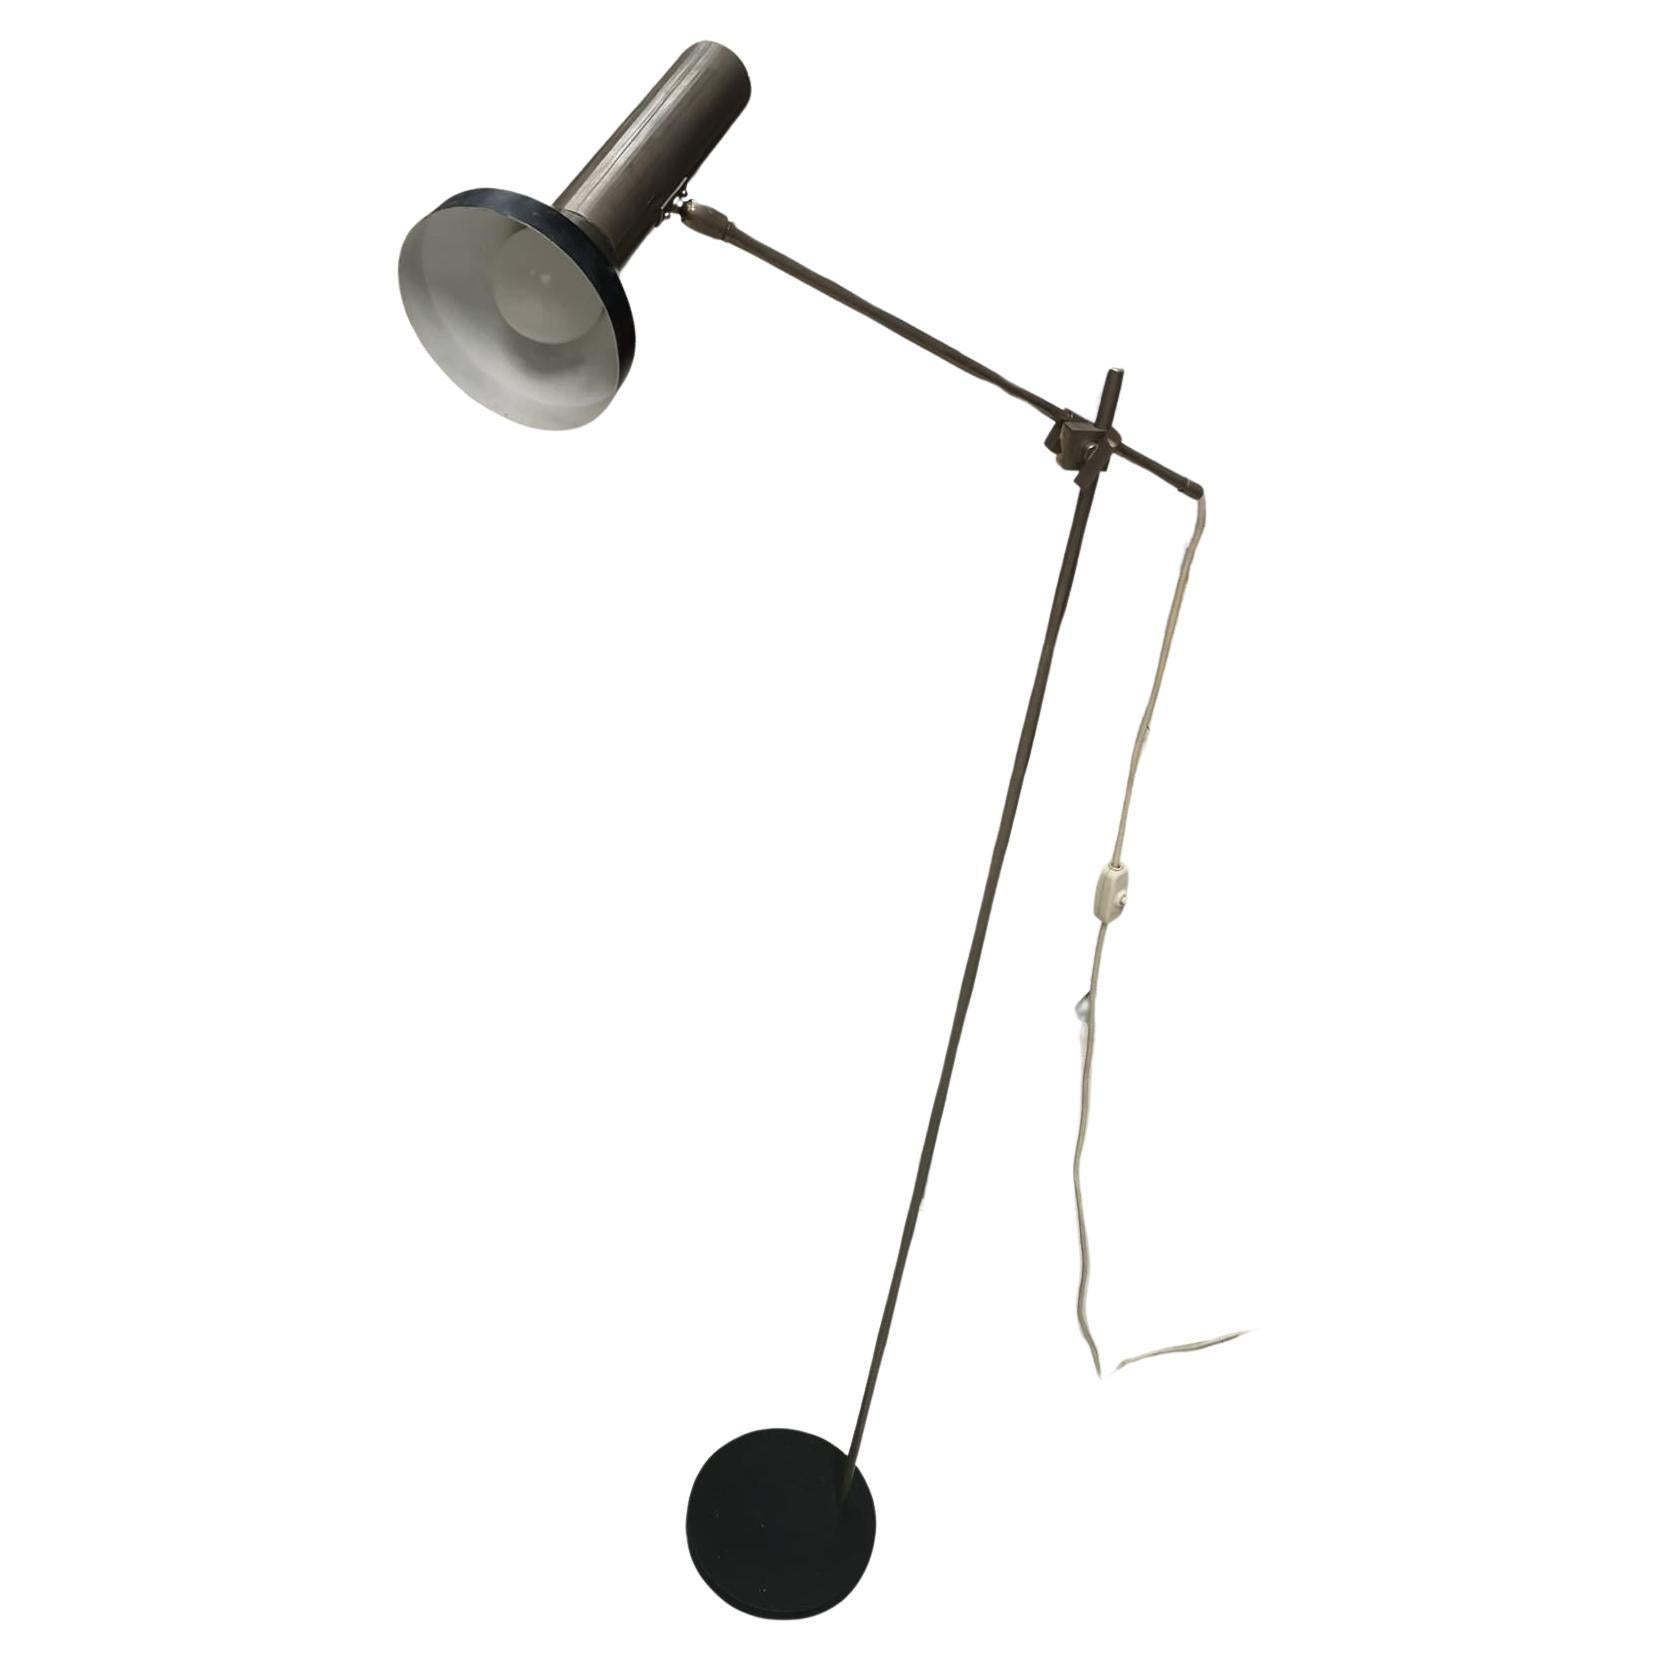 Omi vintage Germany 1970s jointed floor lamp For Sale